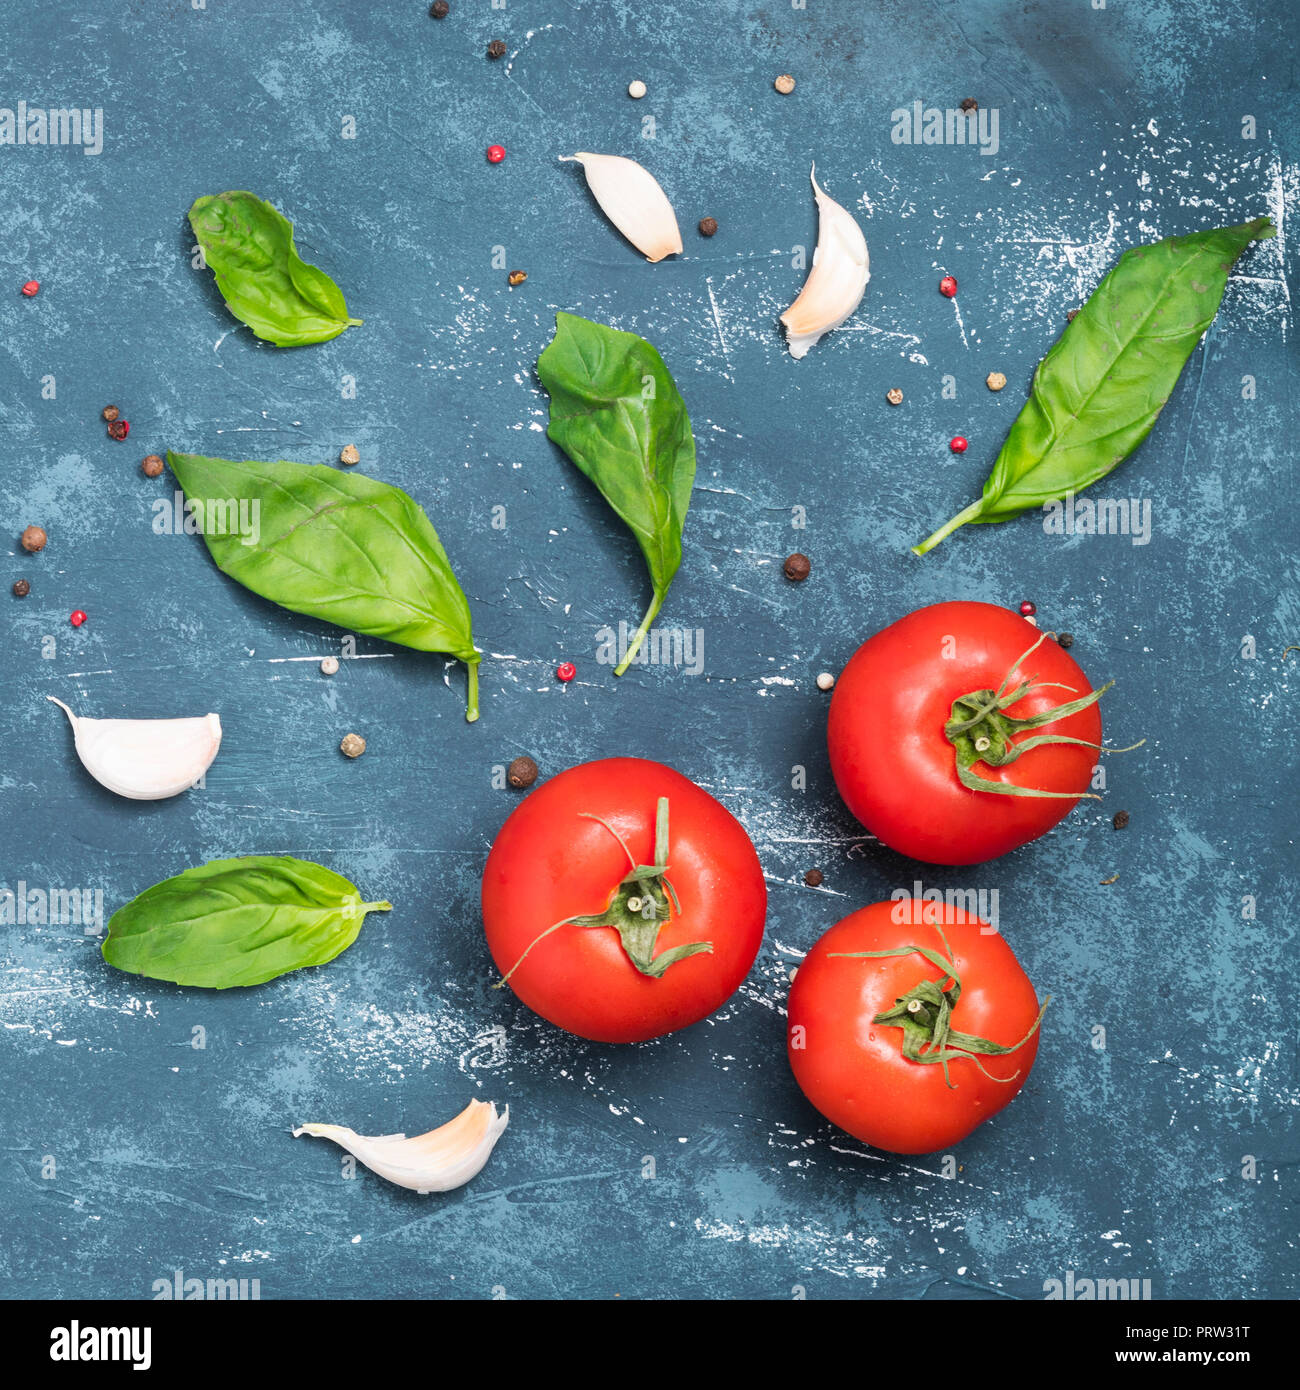 Cooking  ingredients - basil leaves,garlic cloves, pepper and tomatoes. Concrete grunge background. Top view. Square image Stock Photo